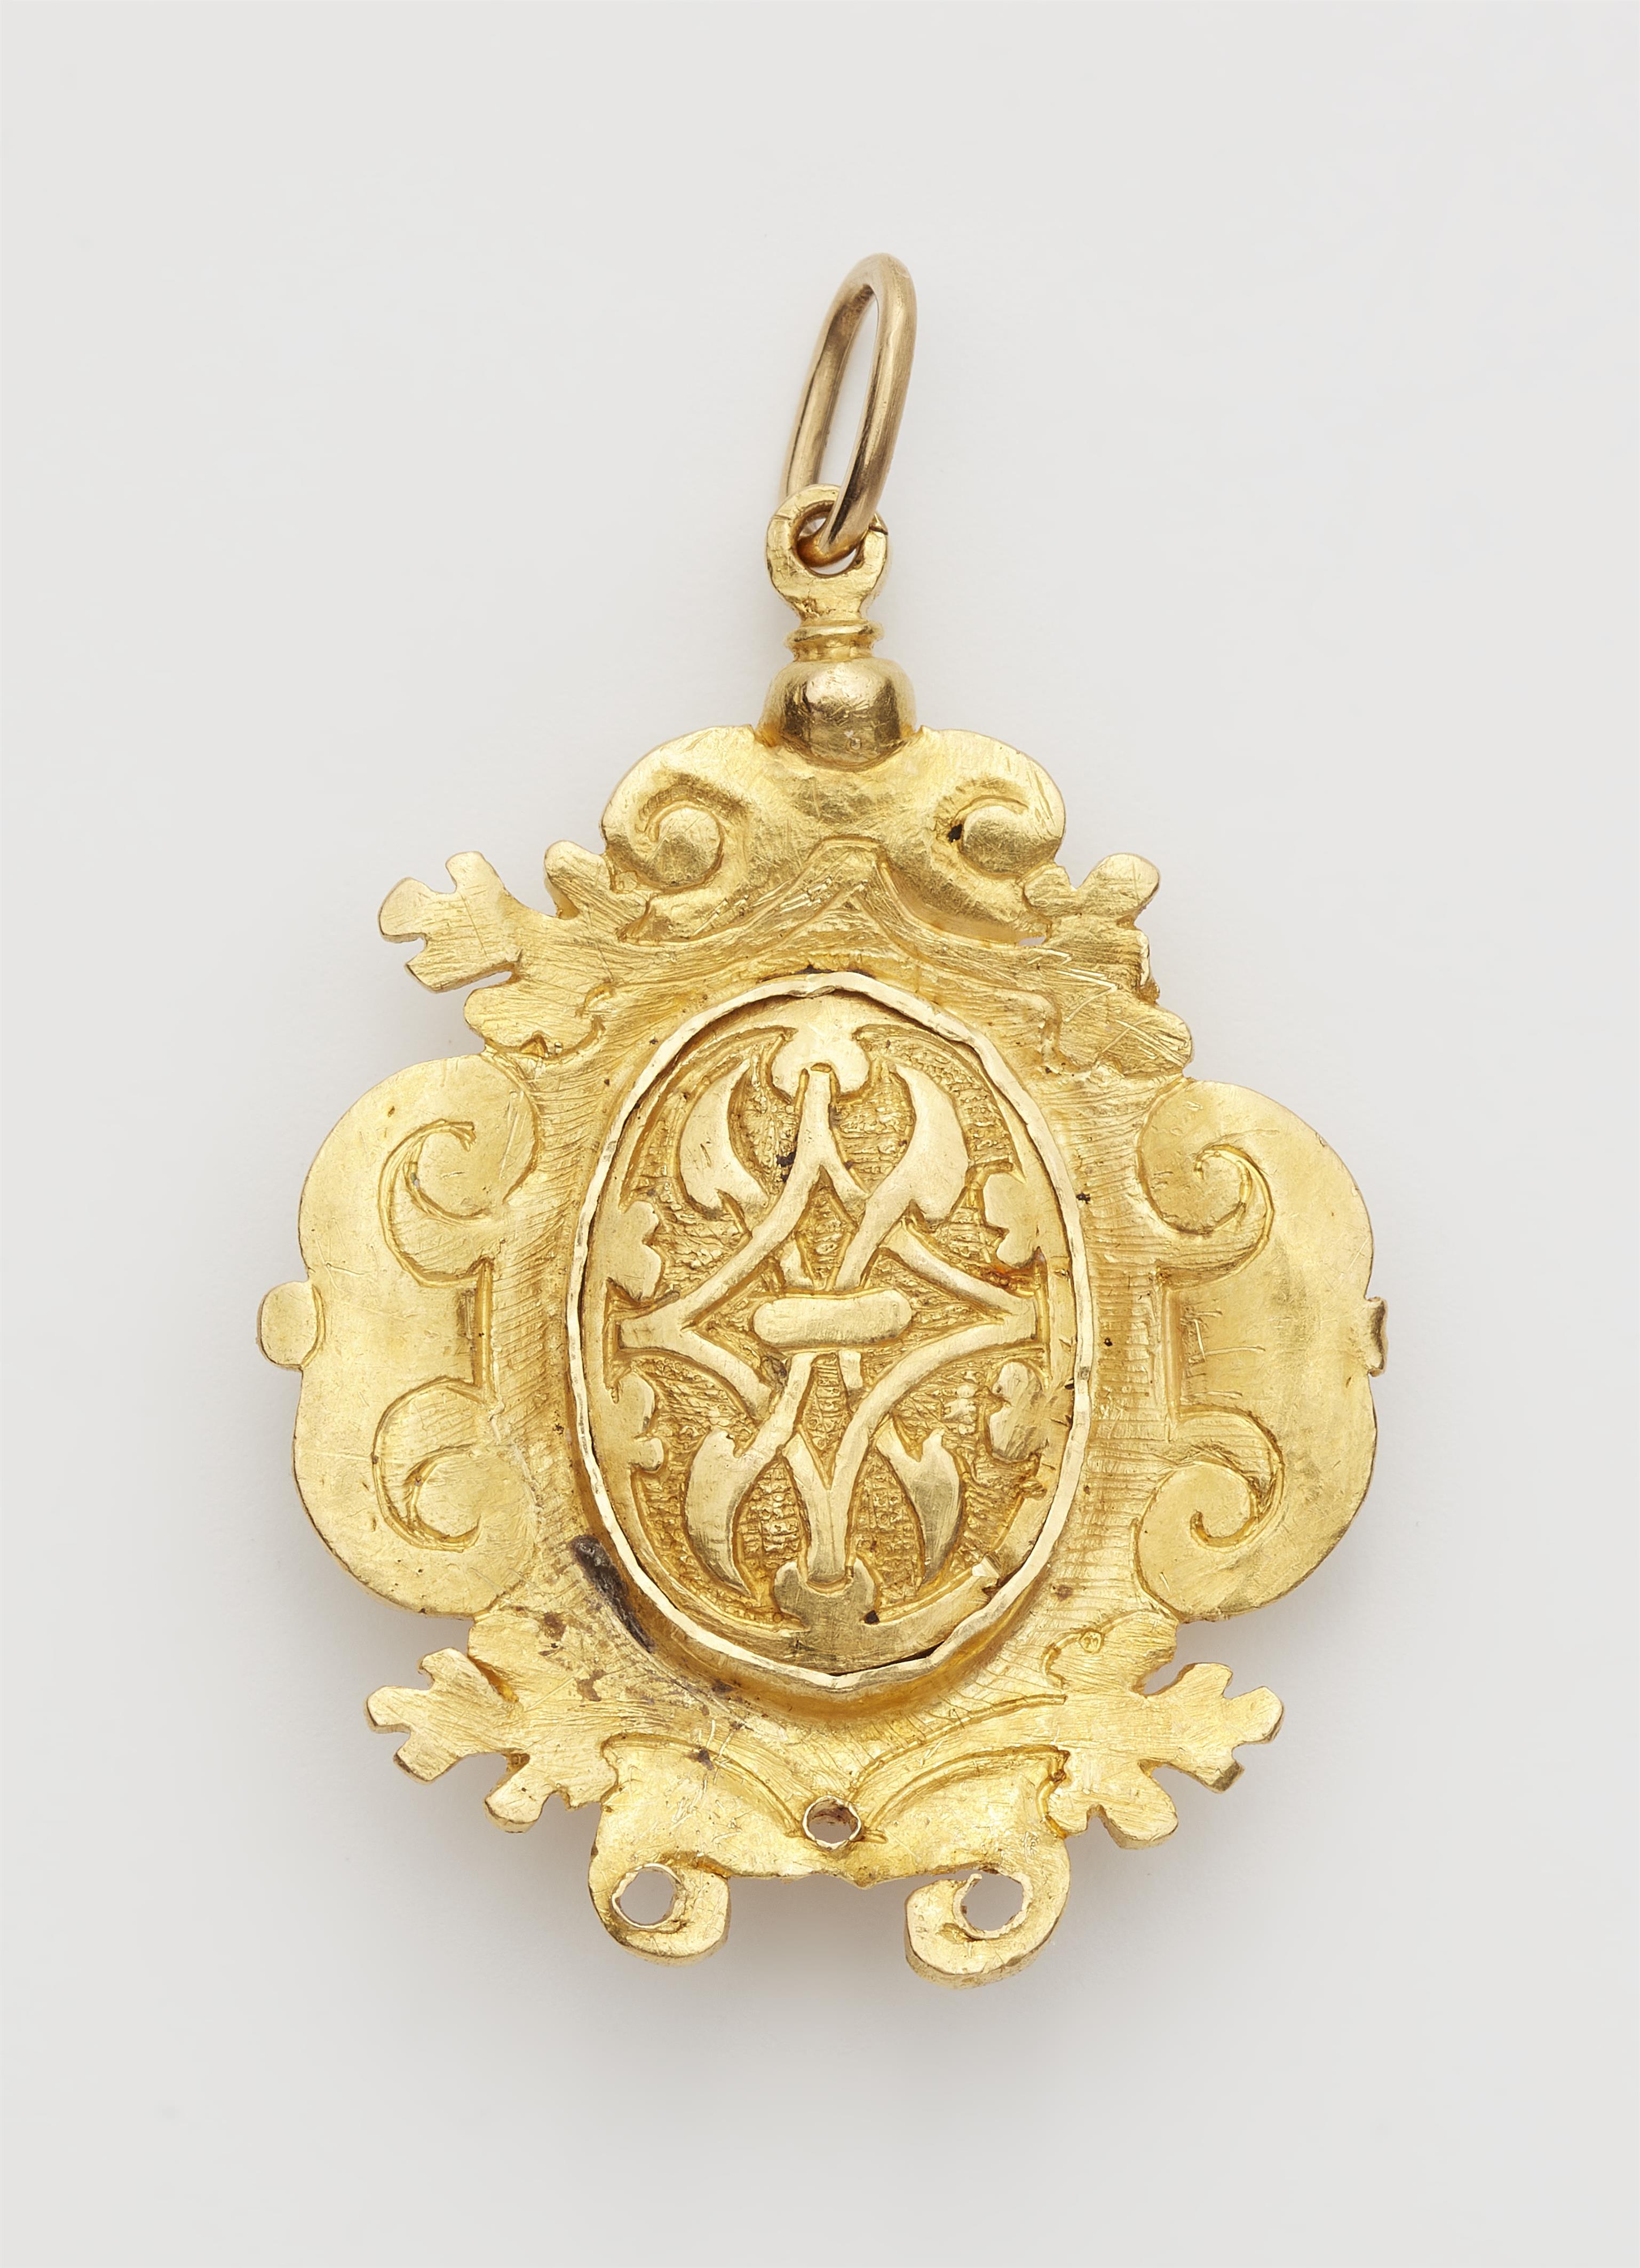 An 18k gold and enamel cartouche frame pendant with a probably Italian 
Renaissance layered chalcedony cameo depicting a lady‘s bust in the style 
of Hellenistic empresses. - image-2